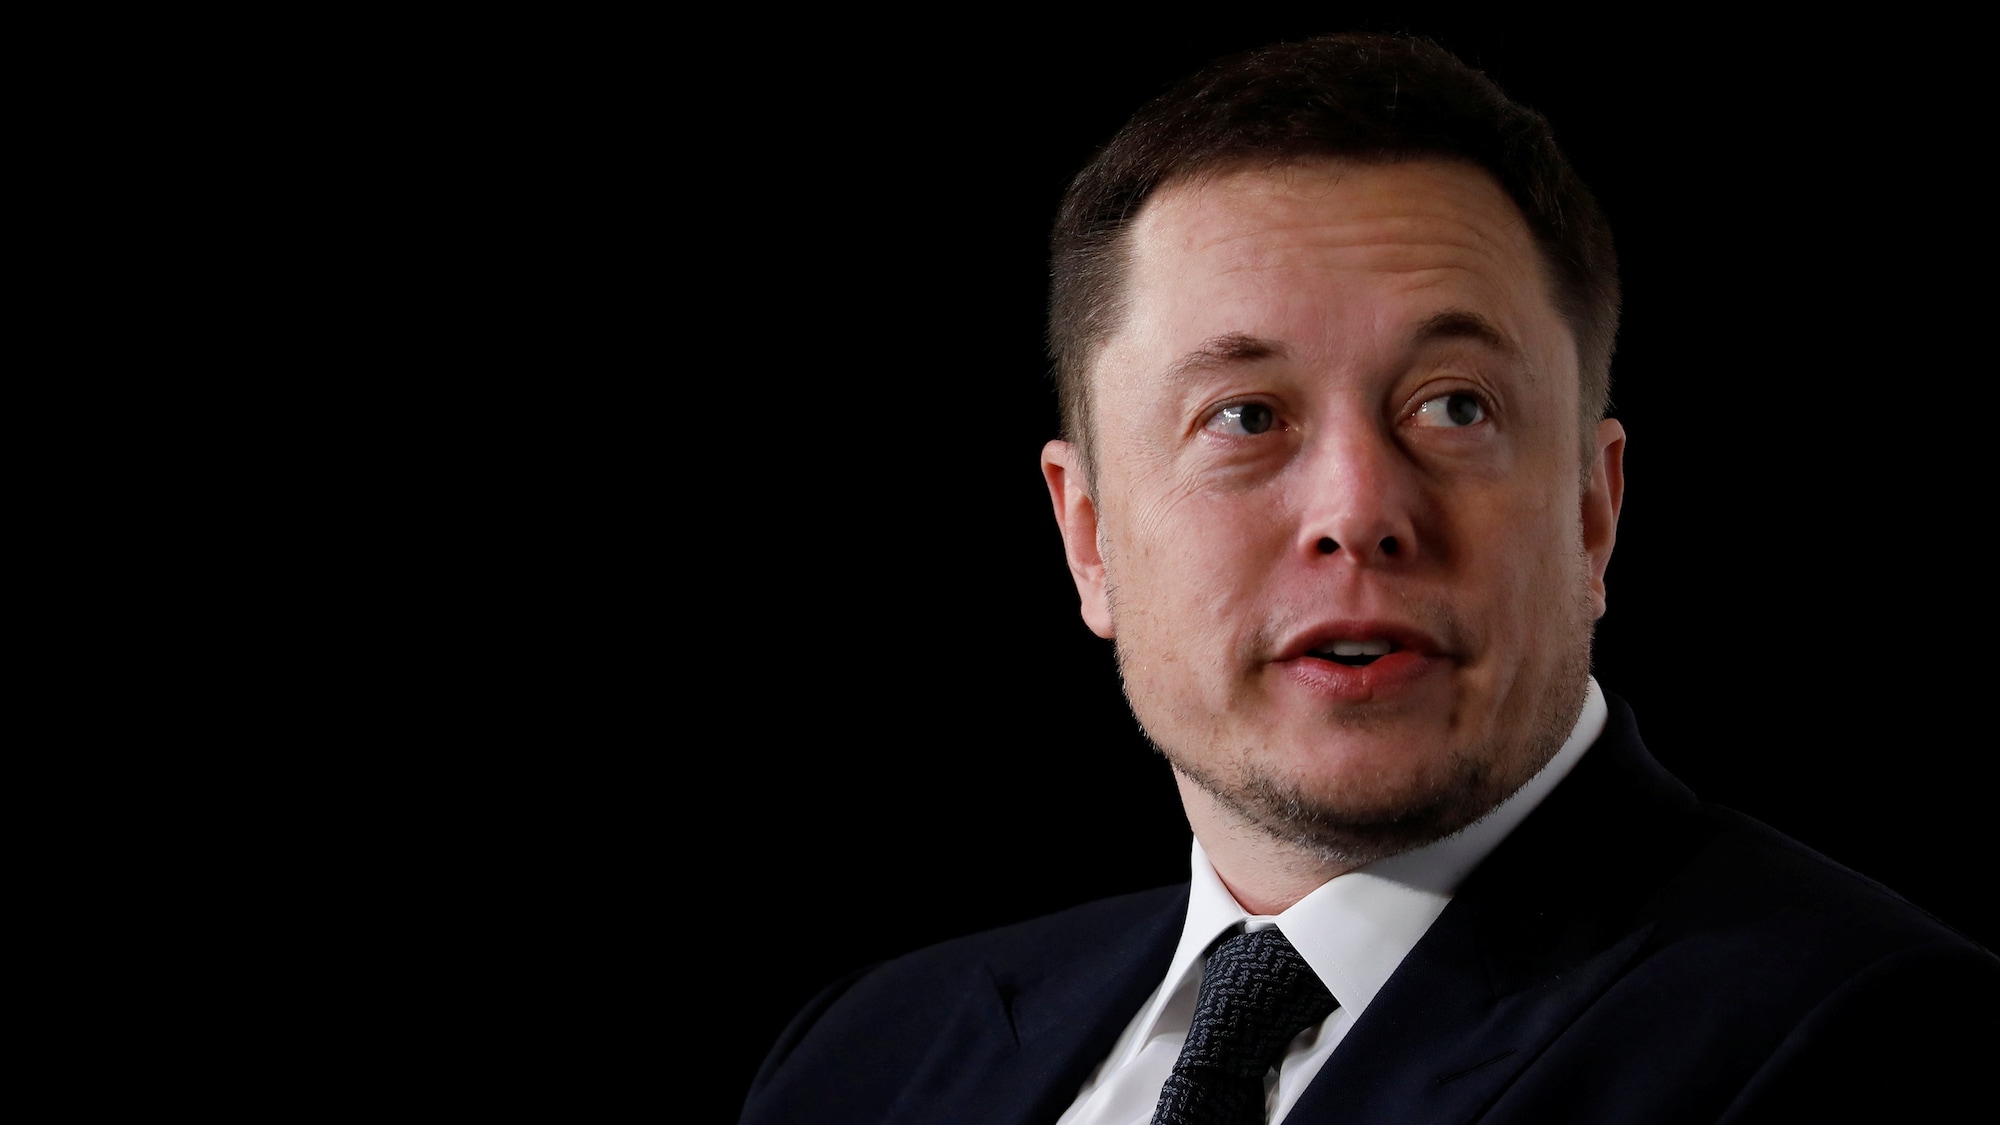 Elon Musk, founder, CEO and lead designer at SpaceX and co-founder of Tesla. Image: Reuters